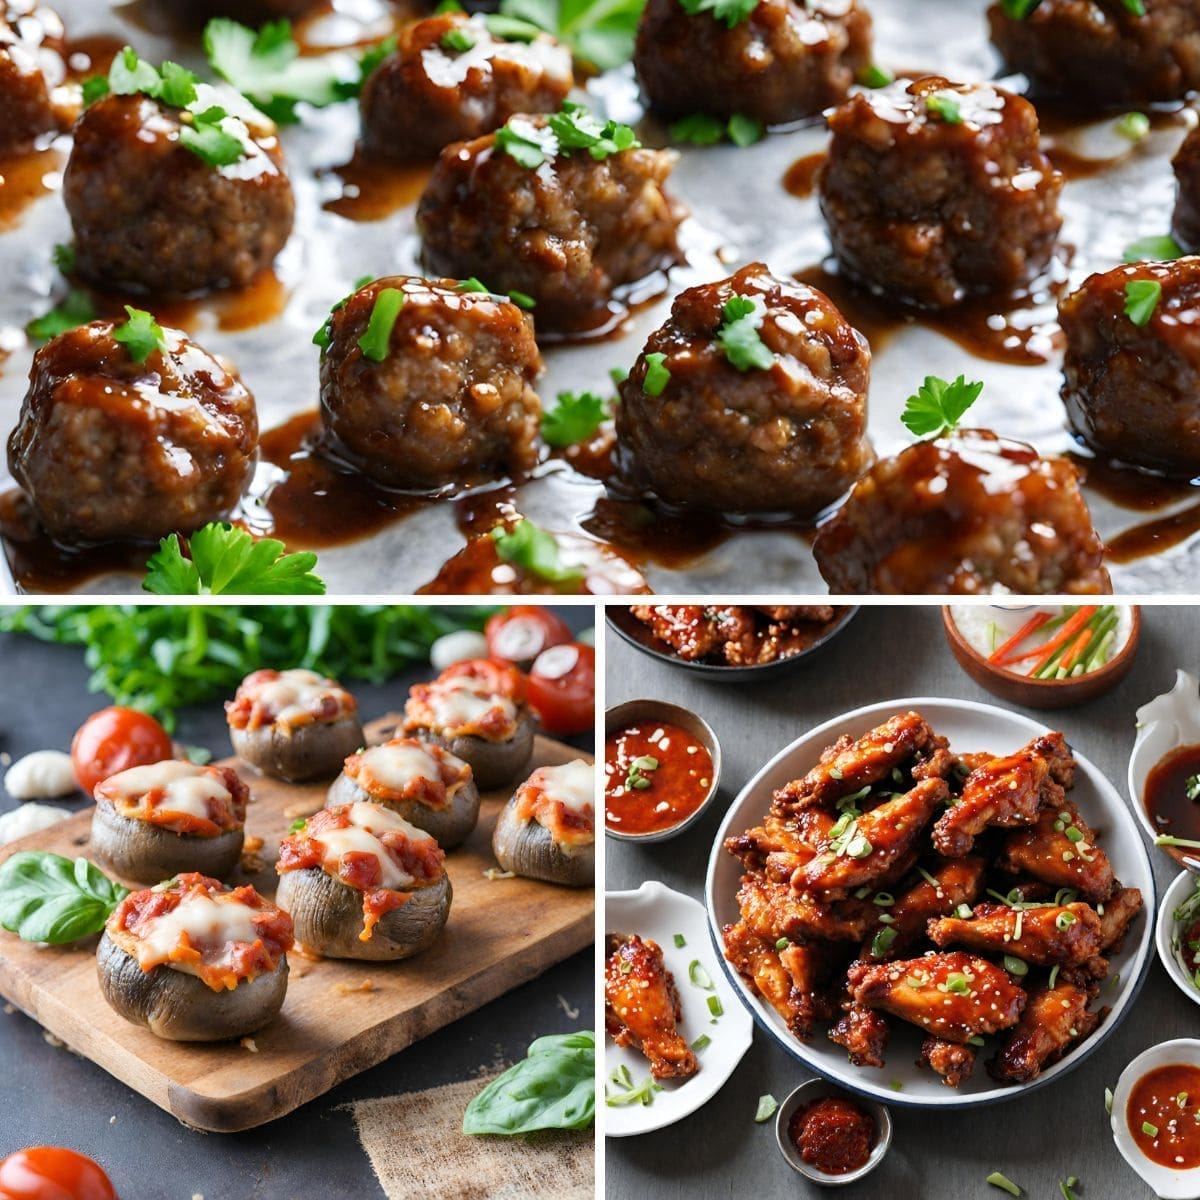 A platter of game day appetizers, including meatballs, stuffed mushrooms, and chicken wings.